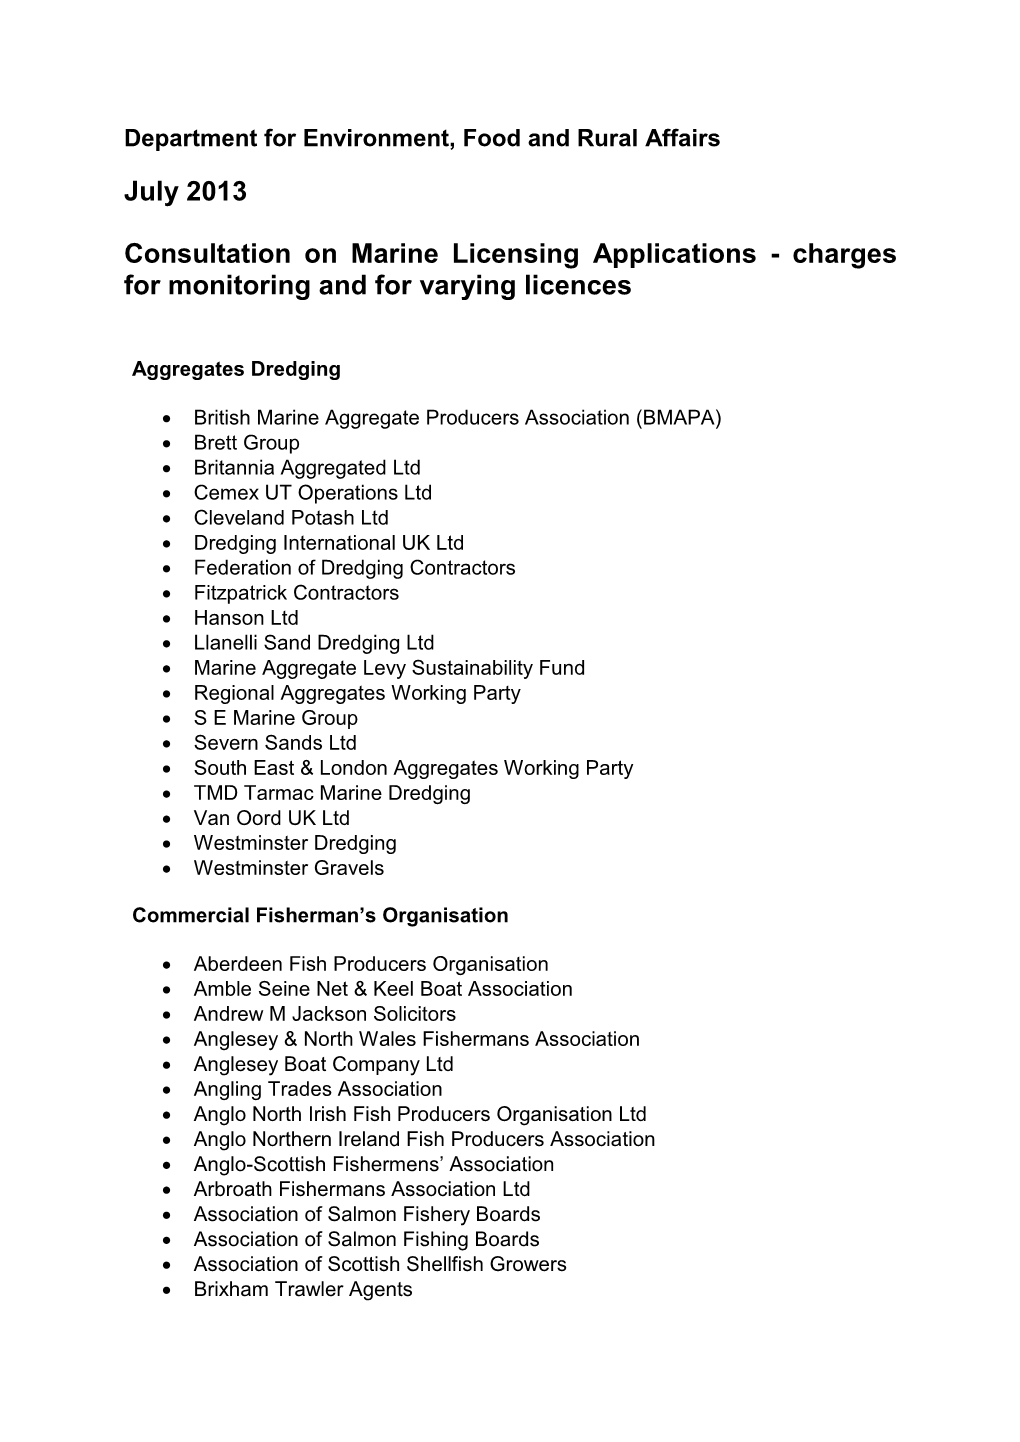 July 2013 Consultation on Marine Licensing Applications